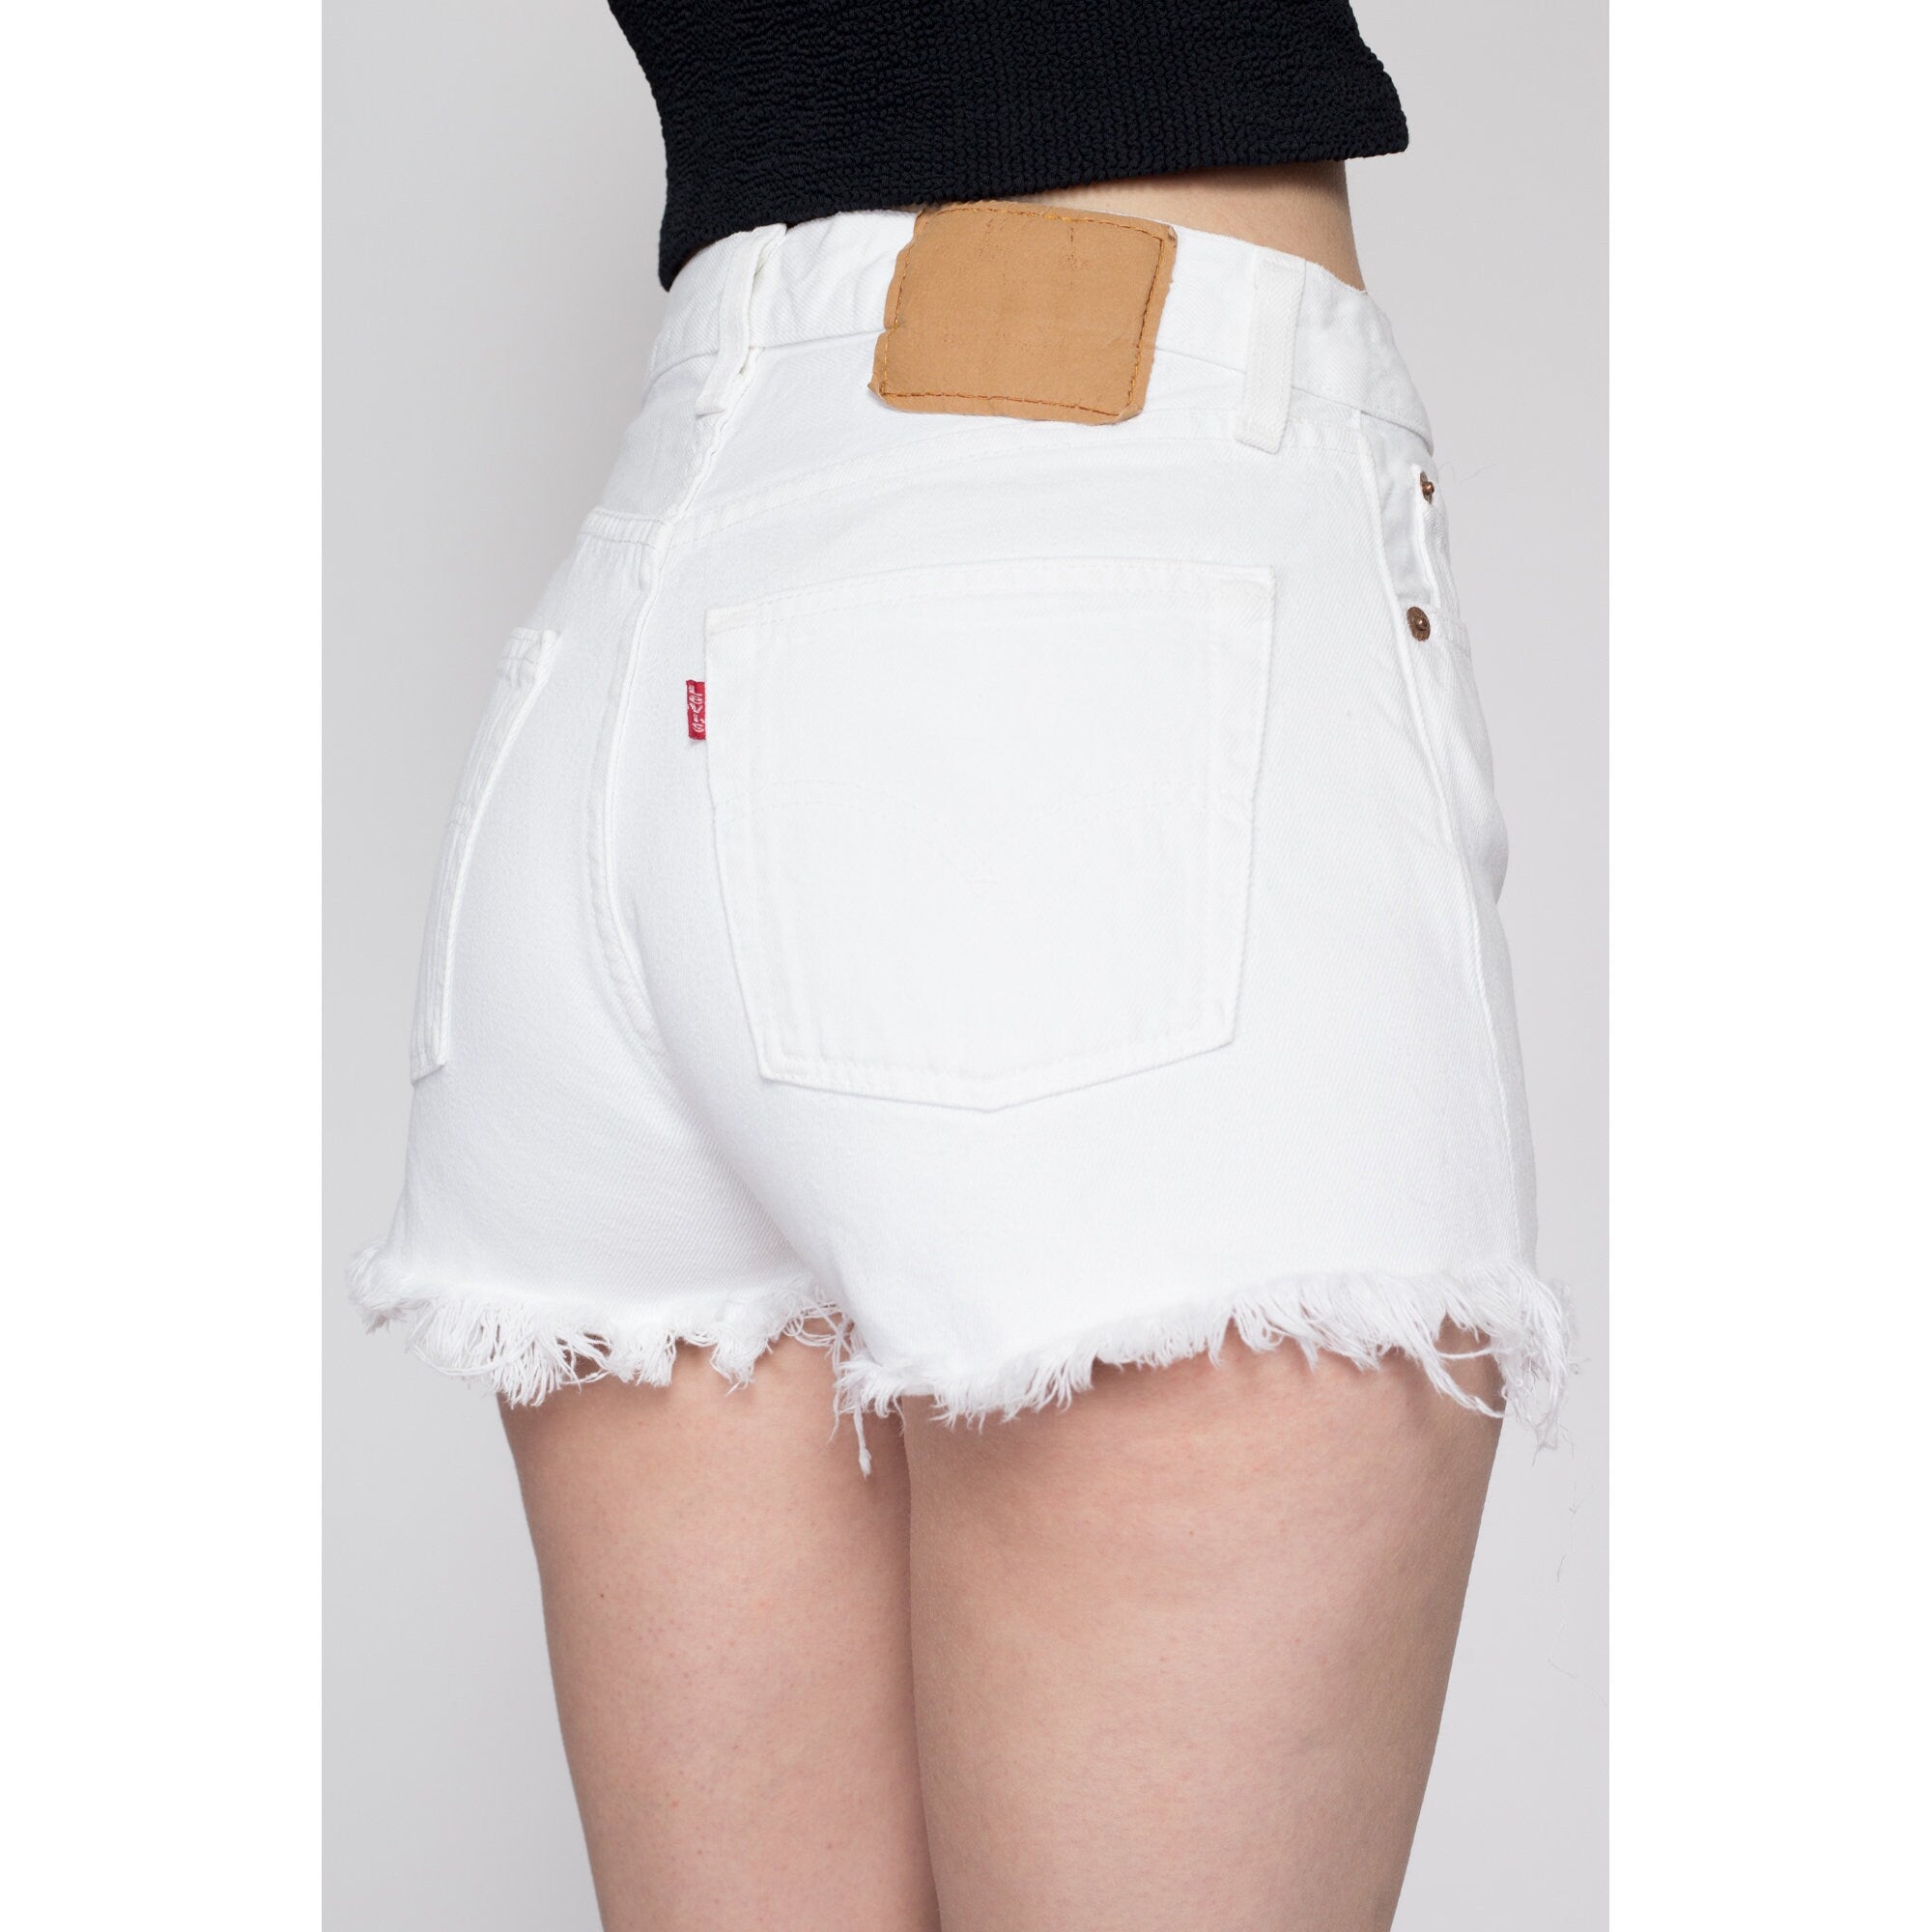 Buy Levi's® Amazing High Waisted Mom Shorts from the Next UK online shop